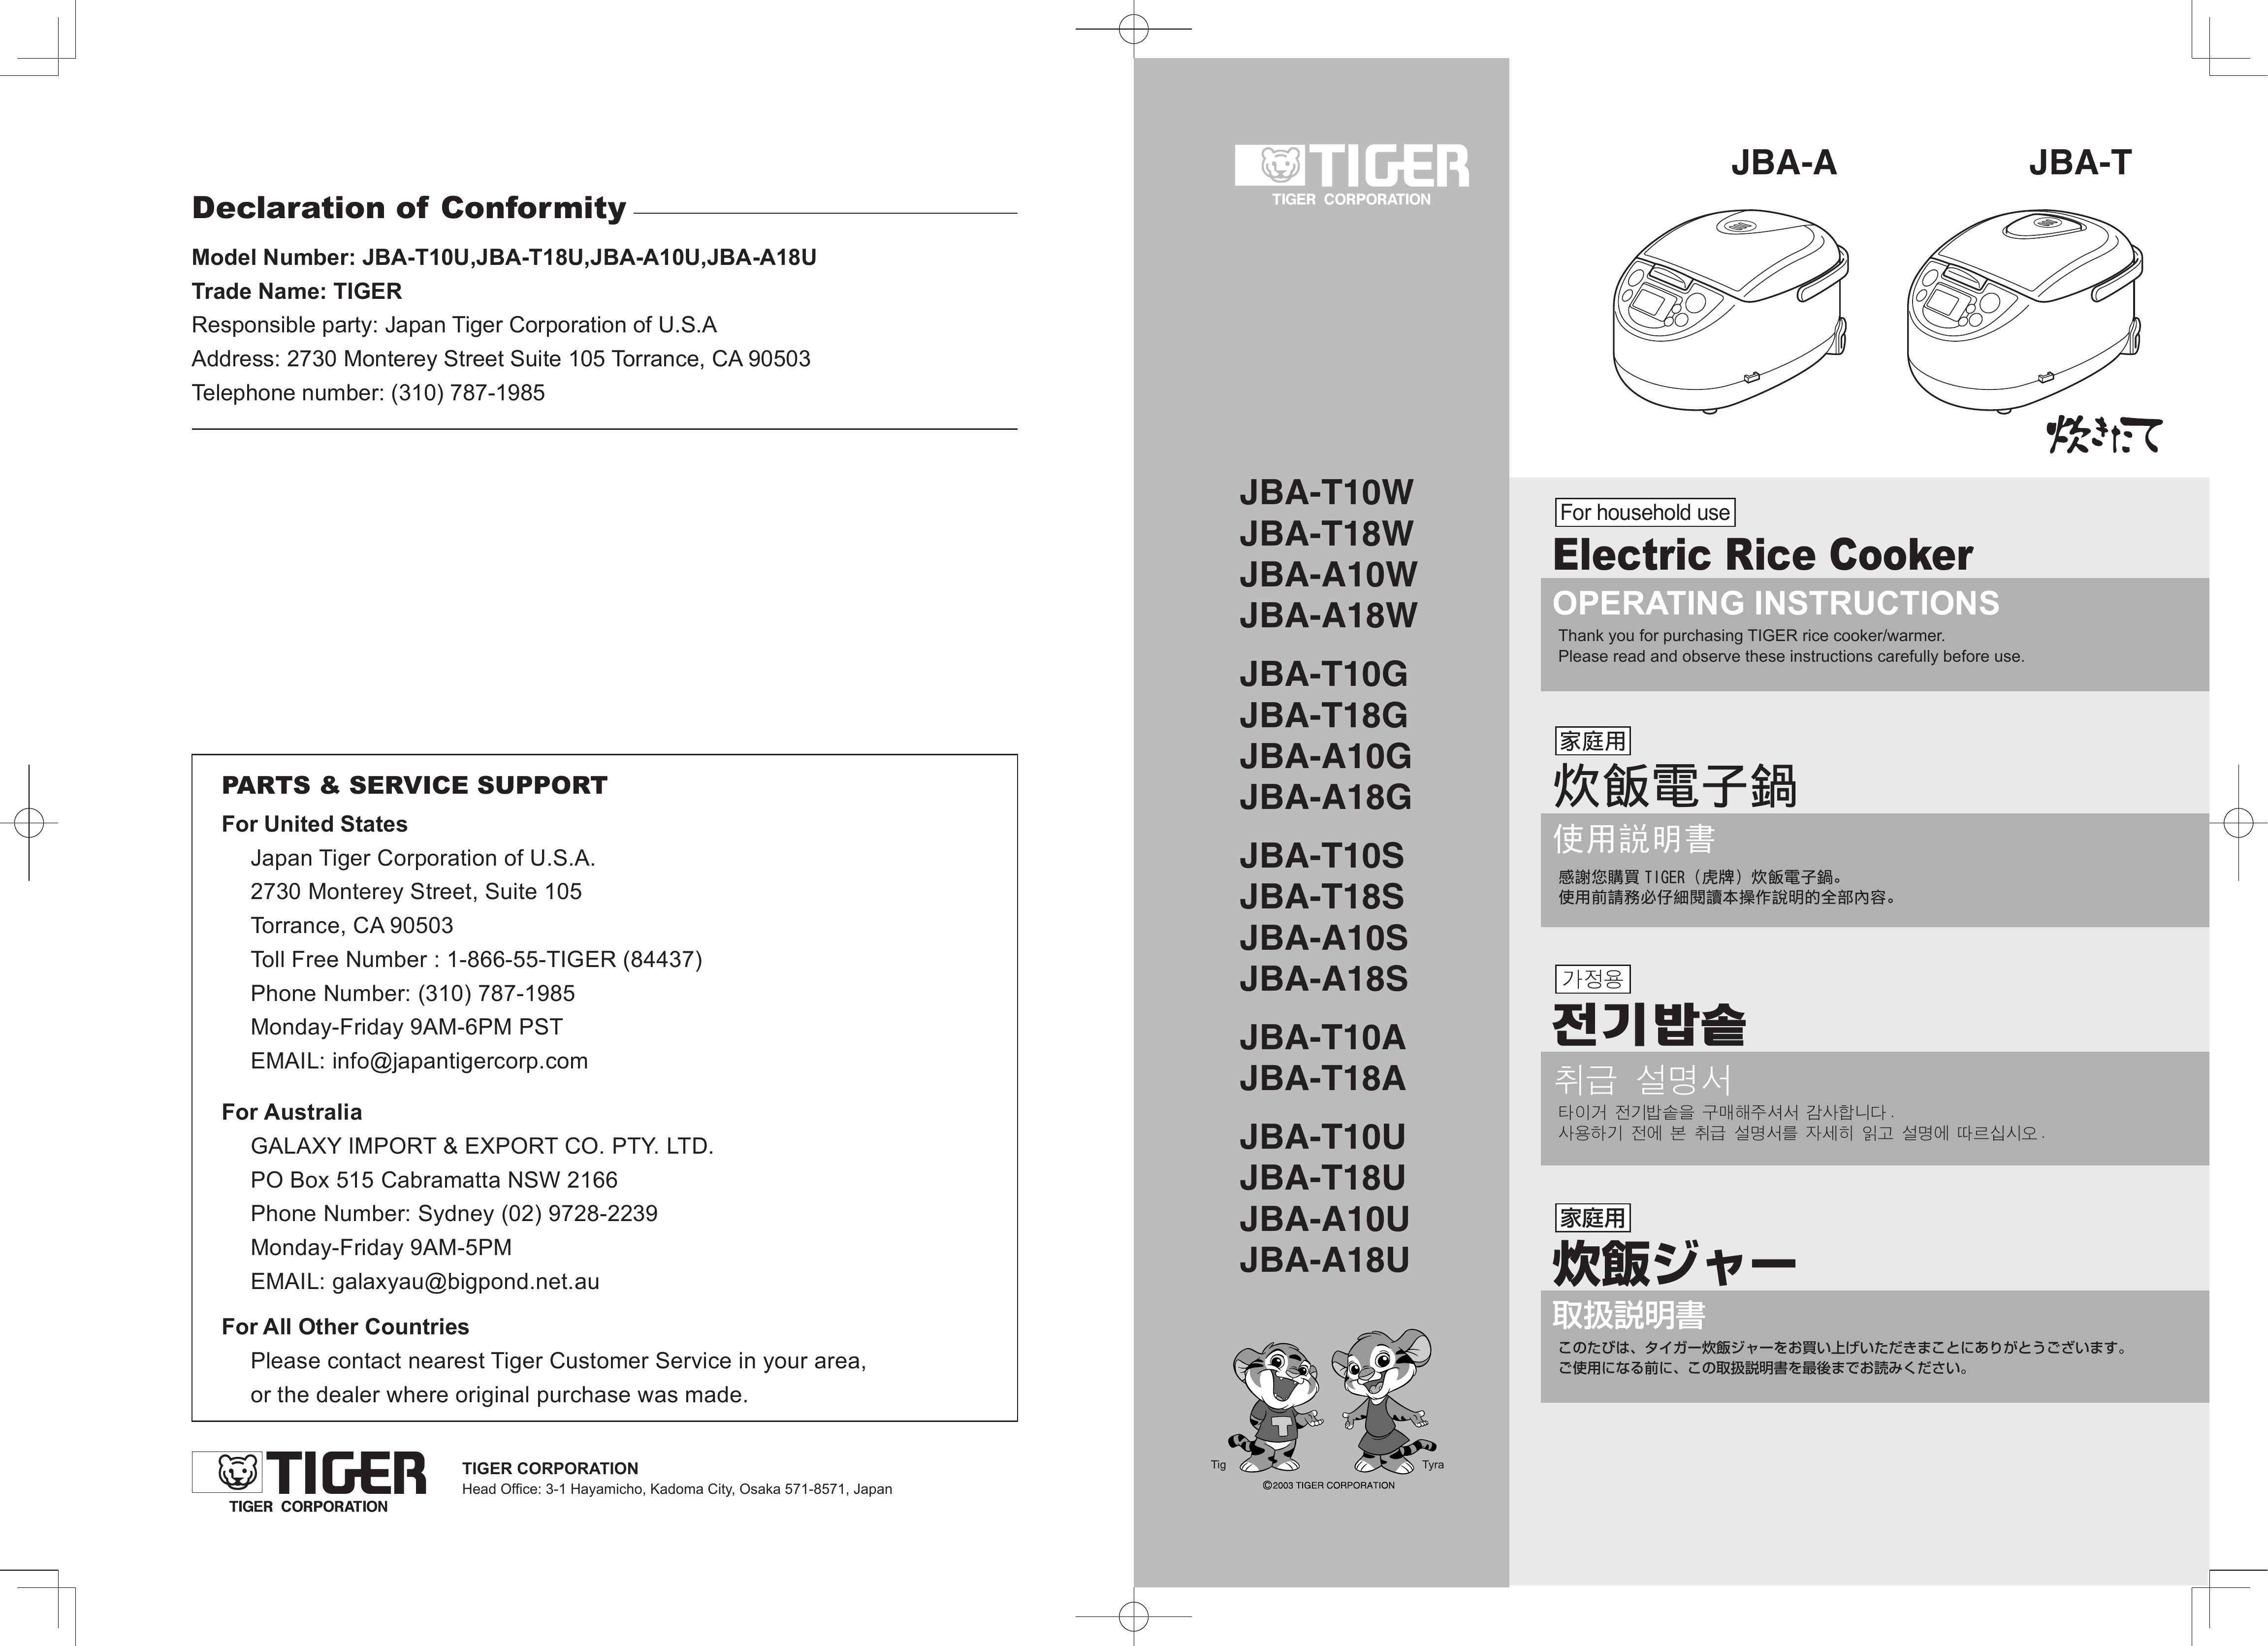 Tiger Products Co., Ltd JBA-T10S Rice Cooker User Manual